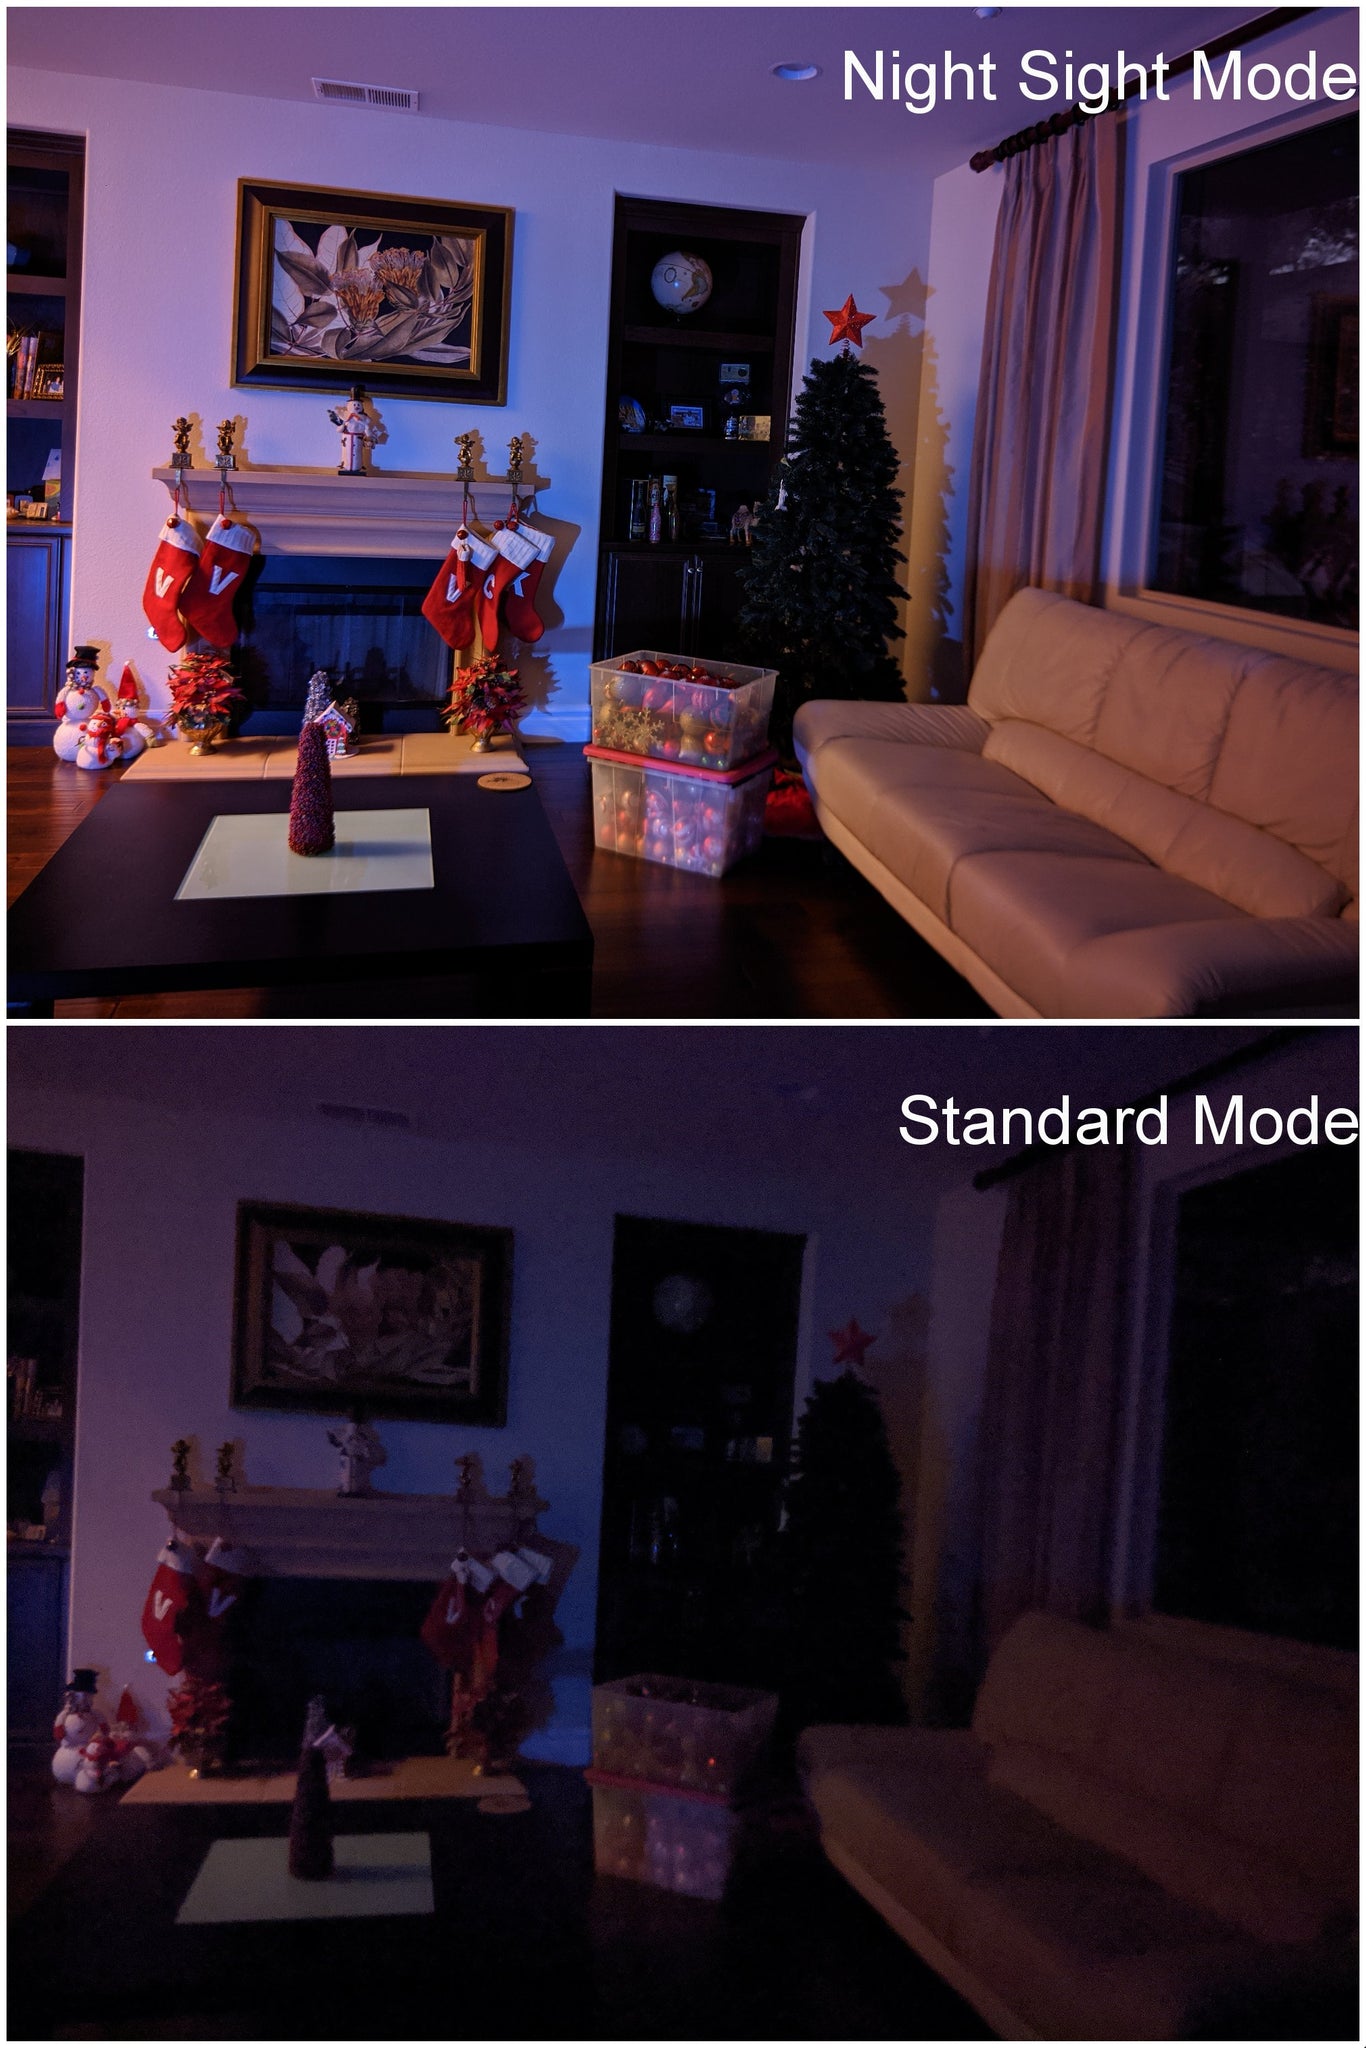 Pixel 3a near infrared enabled camera night sight mode